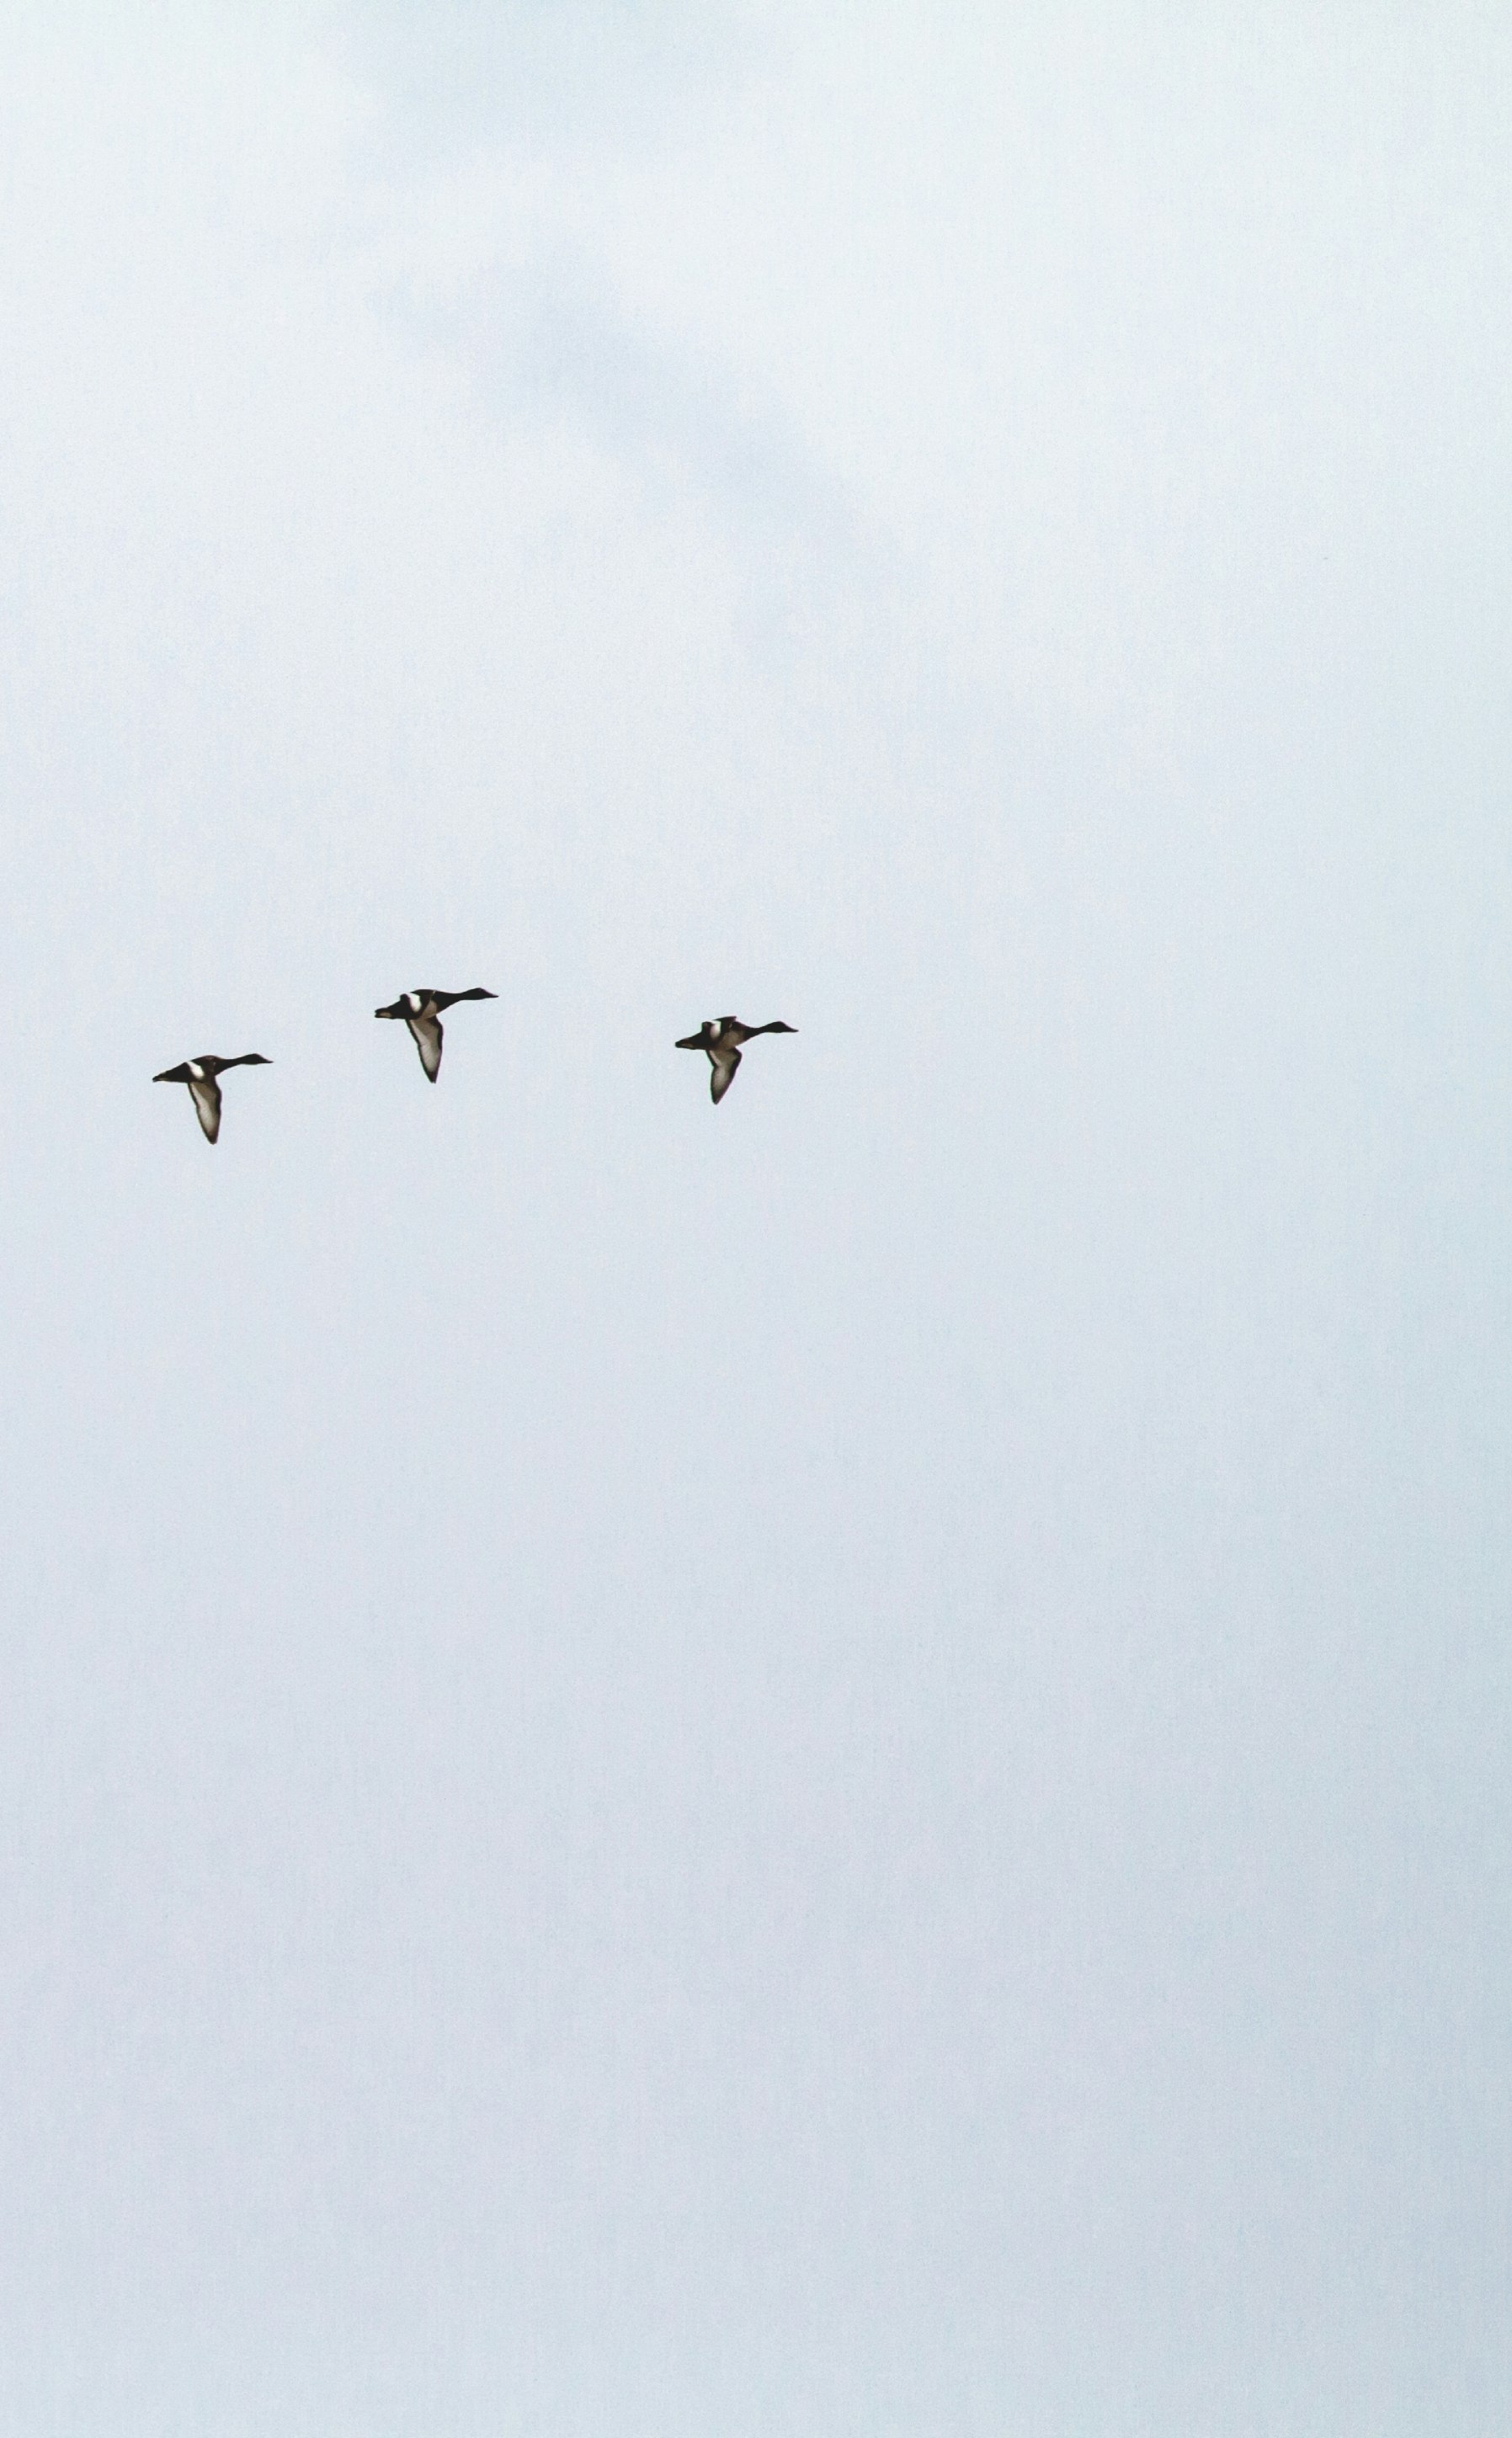 three ducks flying under the clouds during daytime